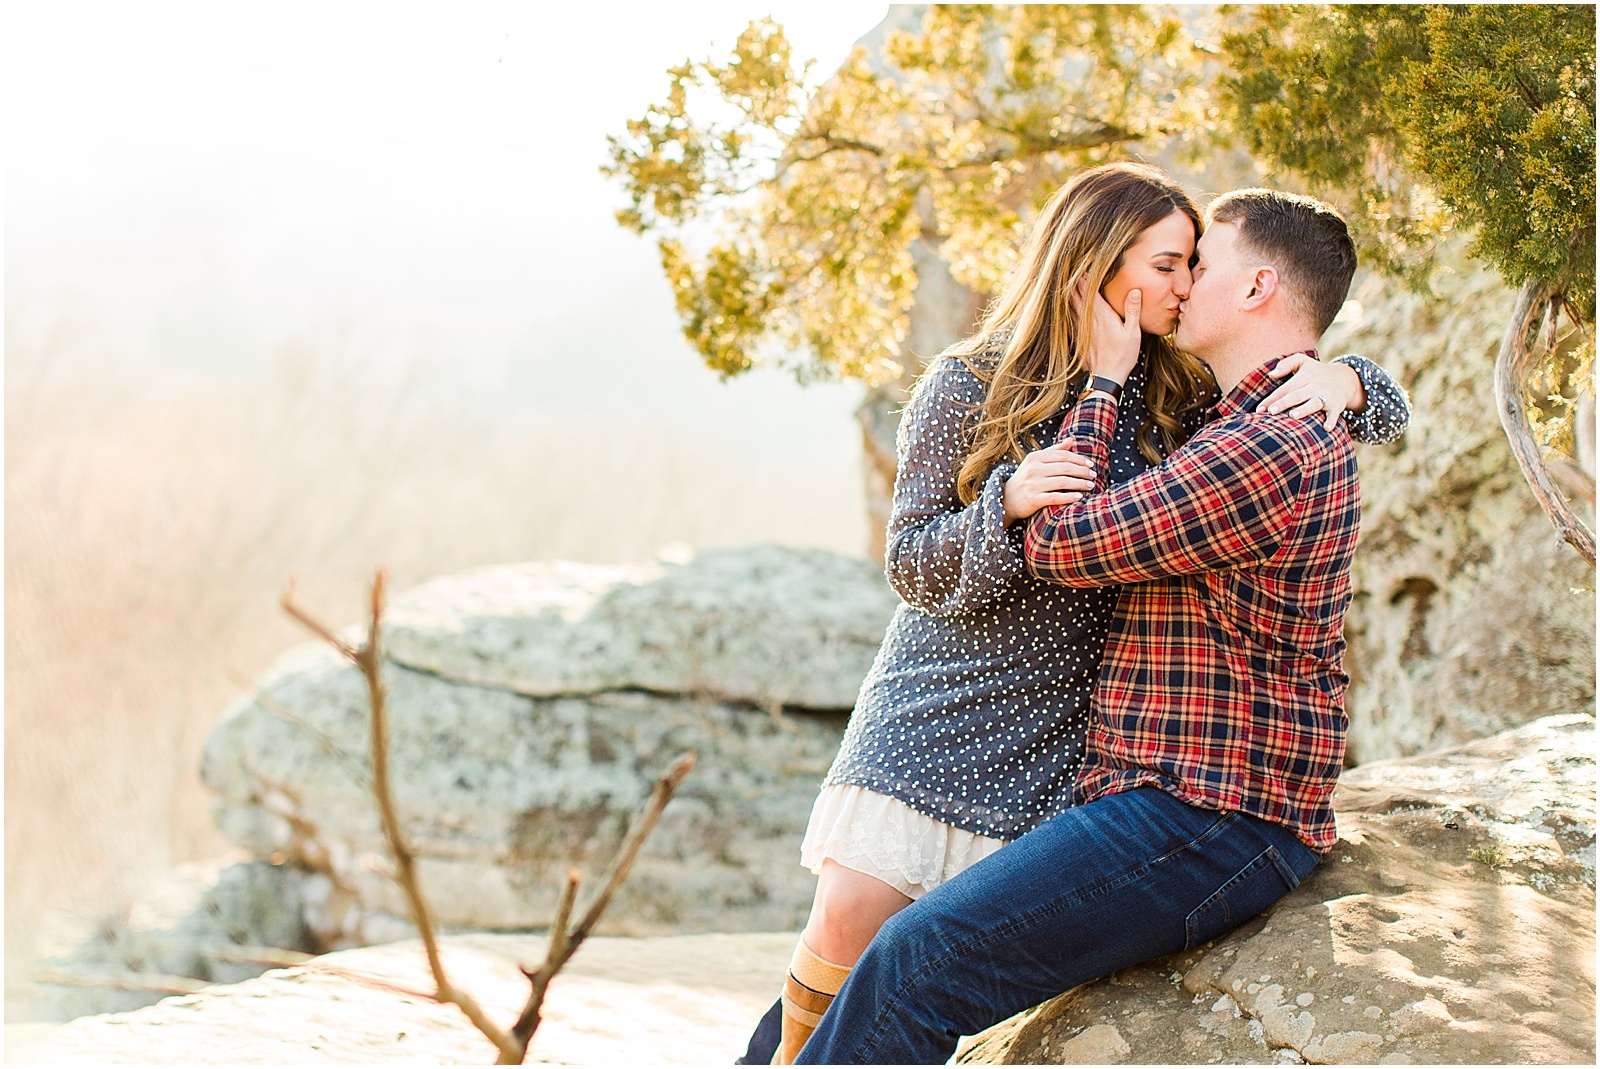 A Sunny Garden of the Gods Engagement Session | Shiloh and Lee | Bret and Brandie Photography022.jpg